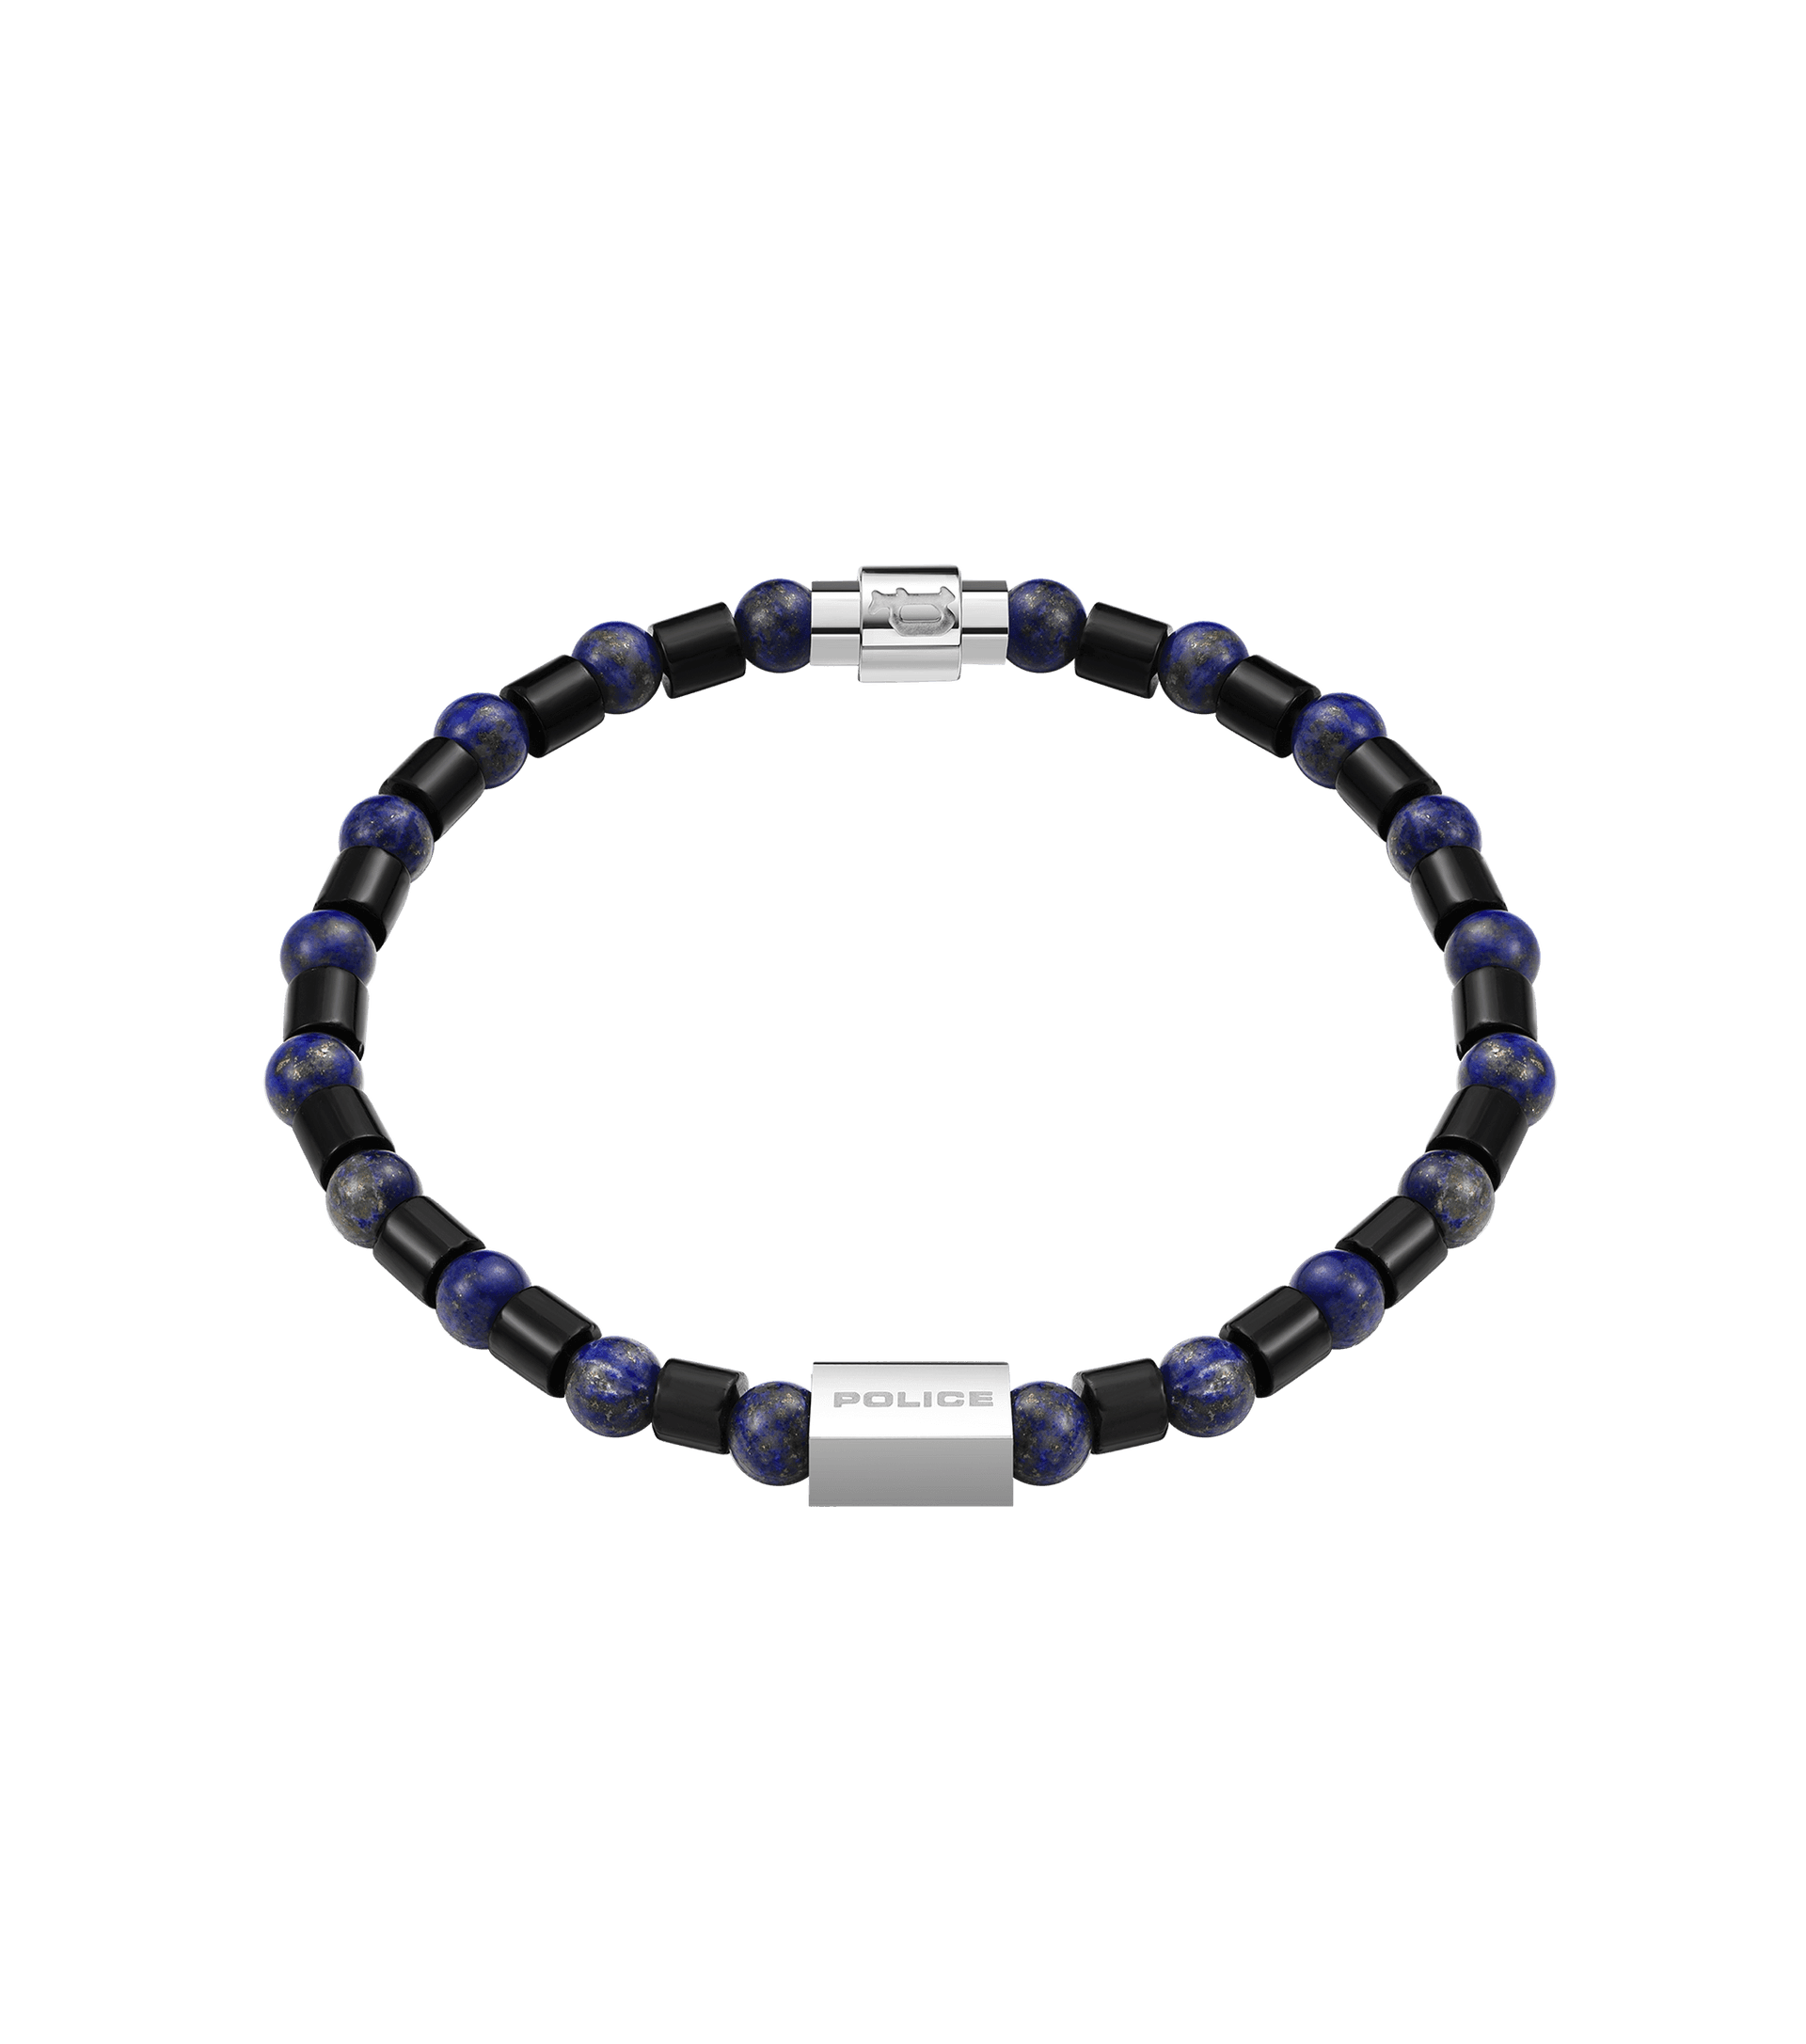 Police jewels Bracelet - Police By For PEAGB0002302 Men Plaquetes